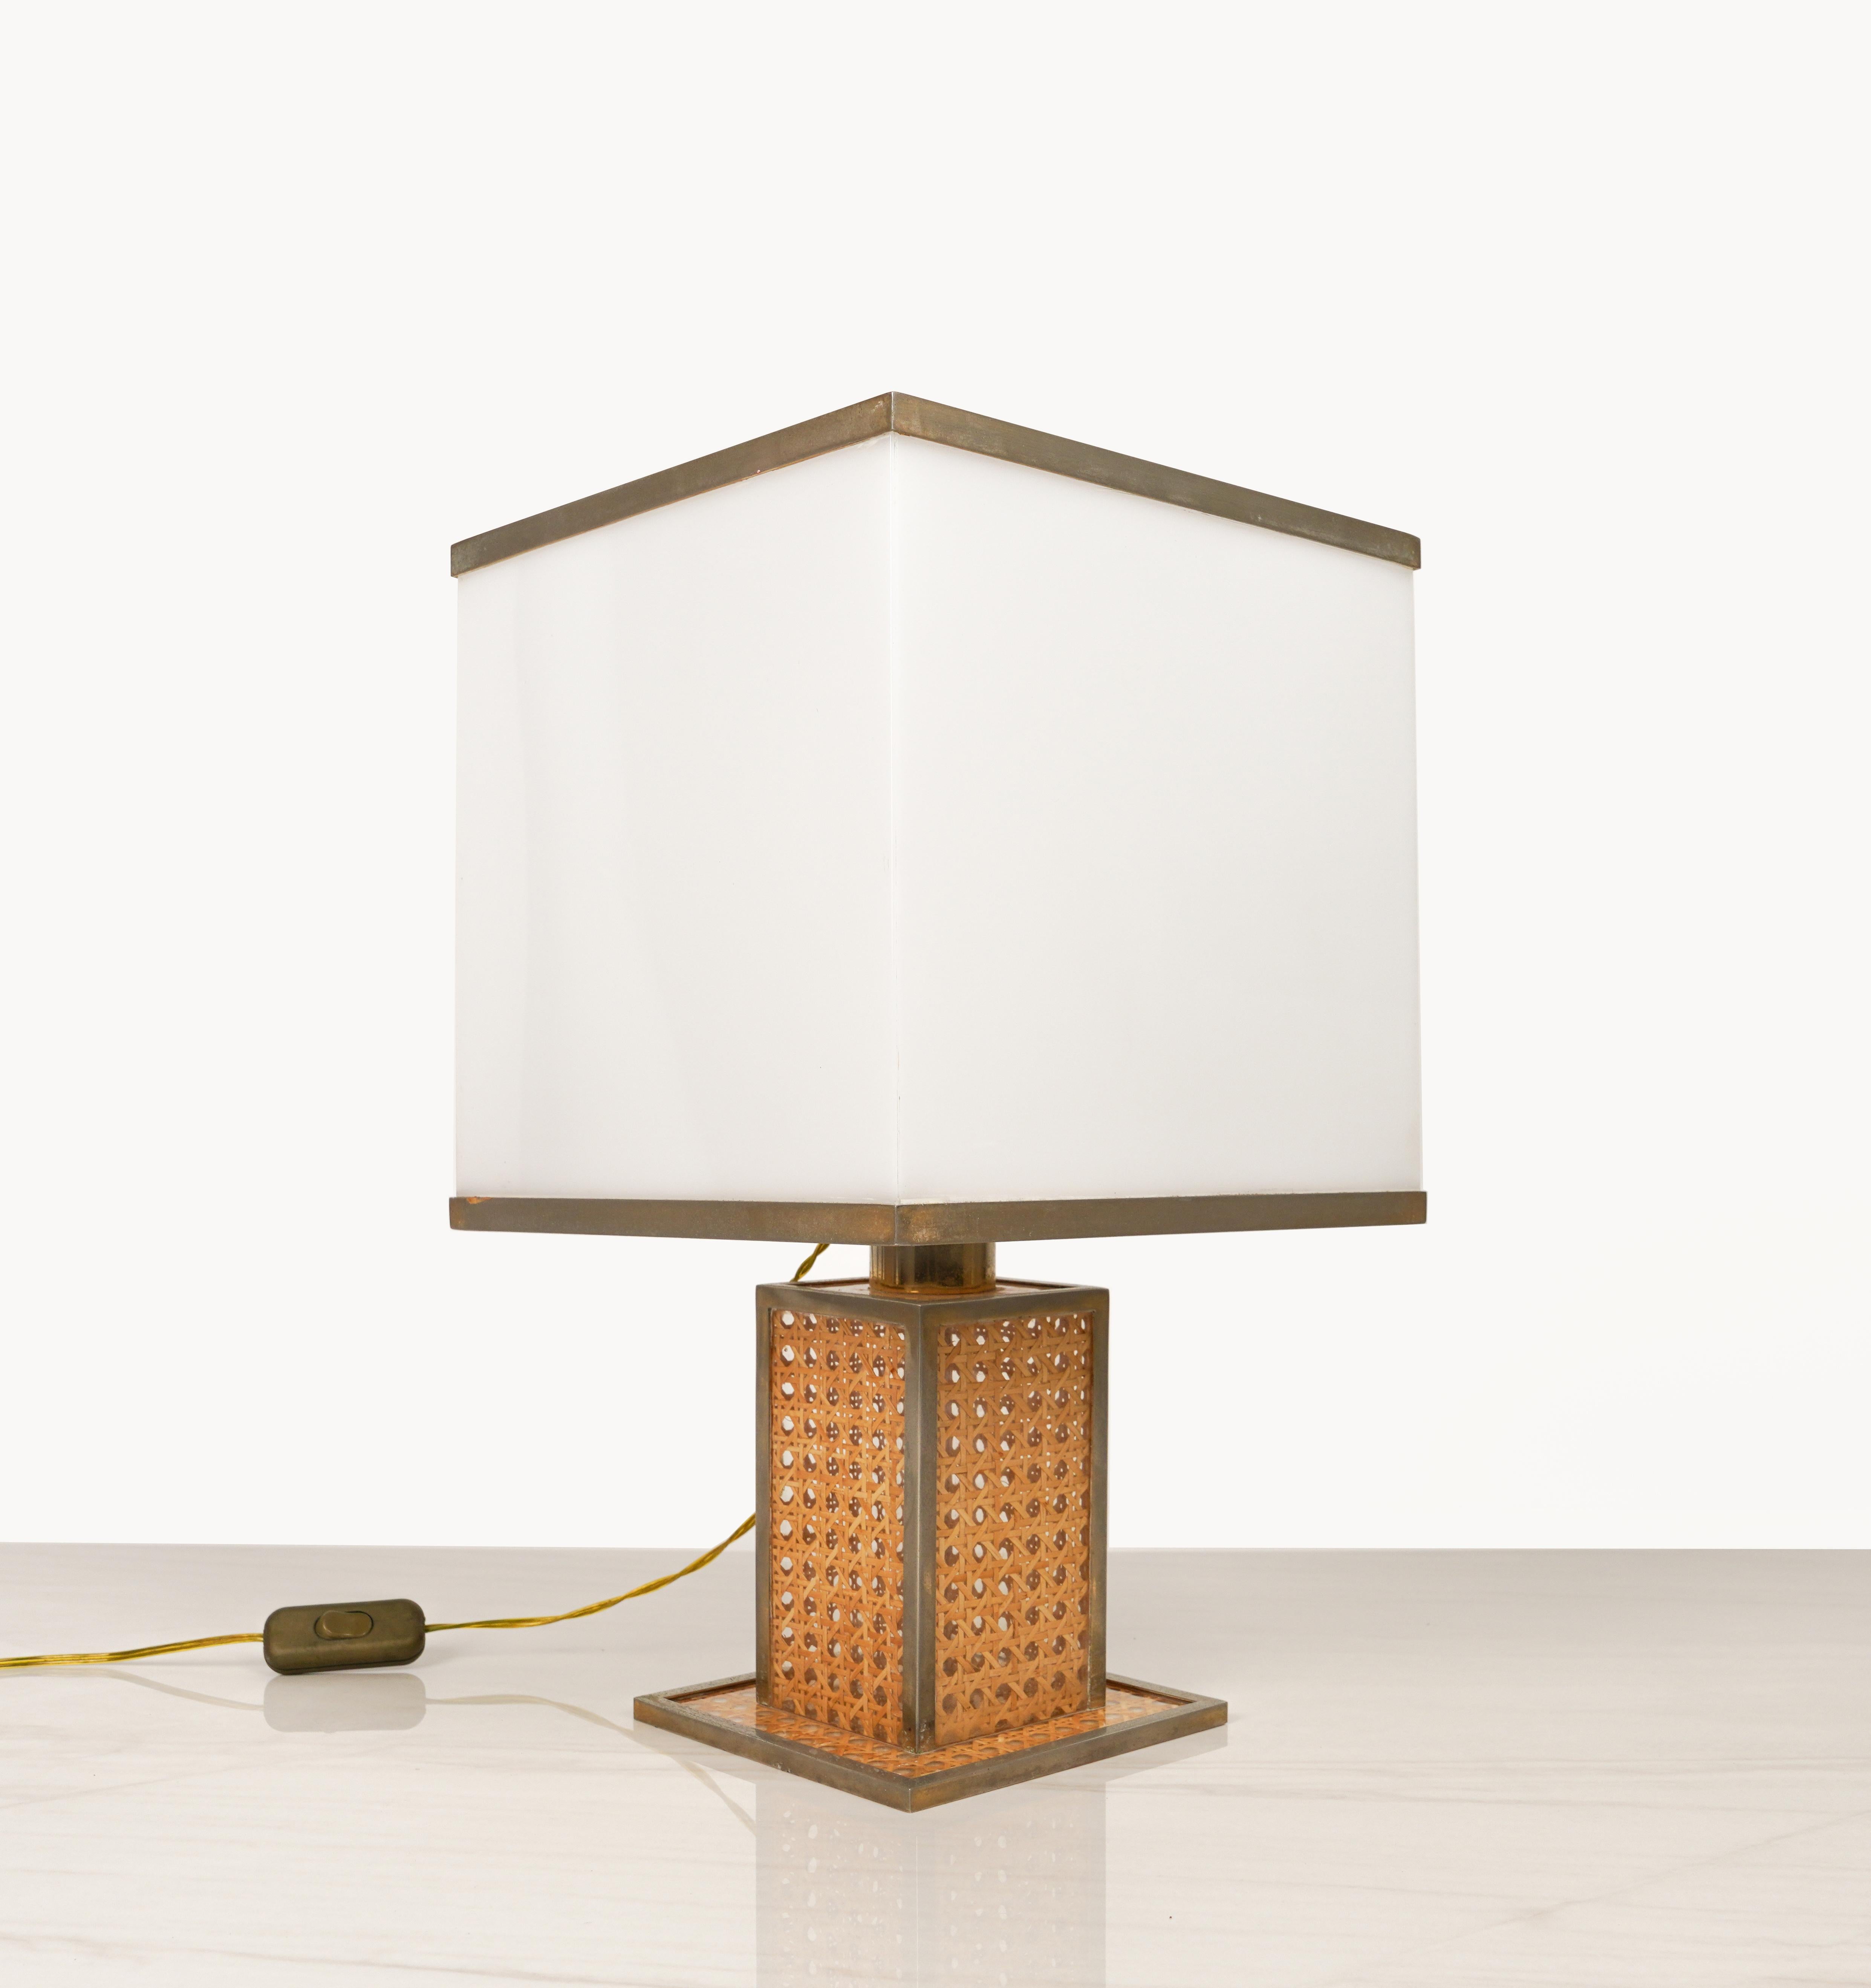 Metal Table Lamp in Lucite, Rattan and Brass Christian Dior Style, Italy 1970s For Sale